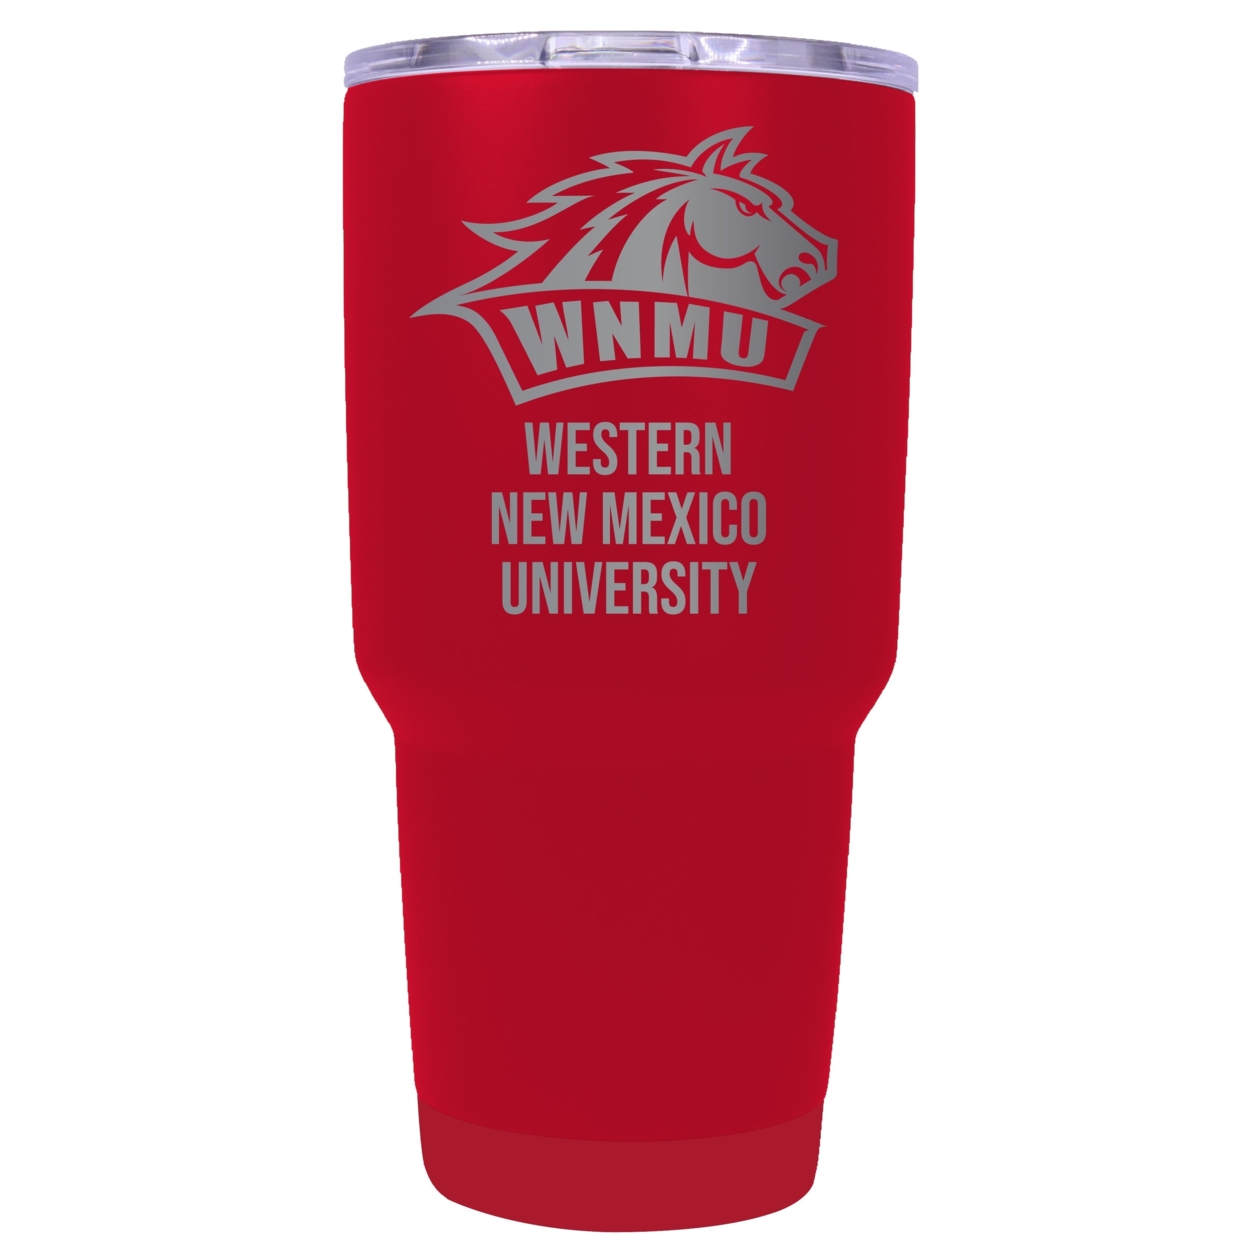 Western New Mexico University 24 Oz Laser Engraved Stainless Steel Insulated Tumbler - Choose Your Color. - Coral